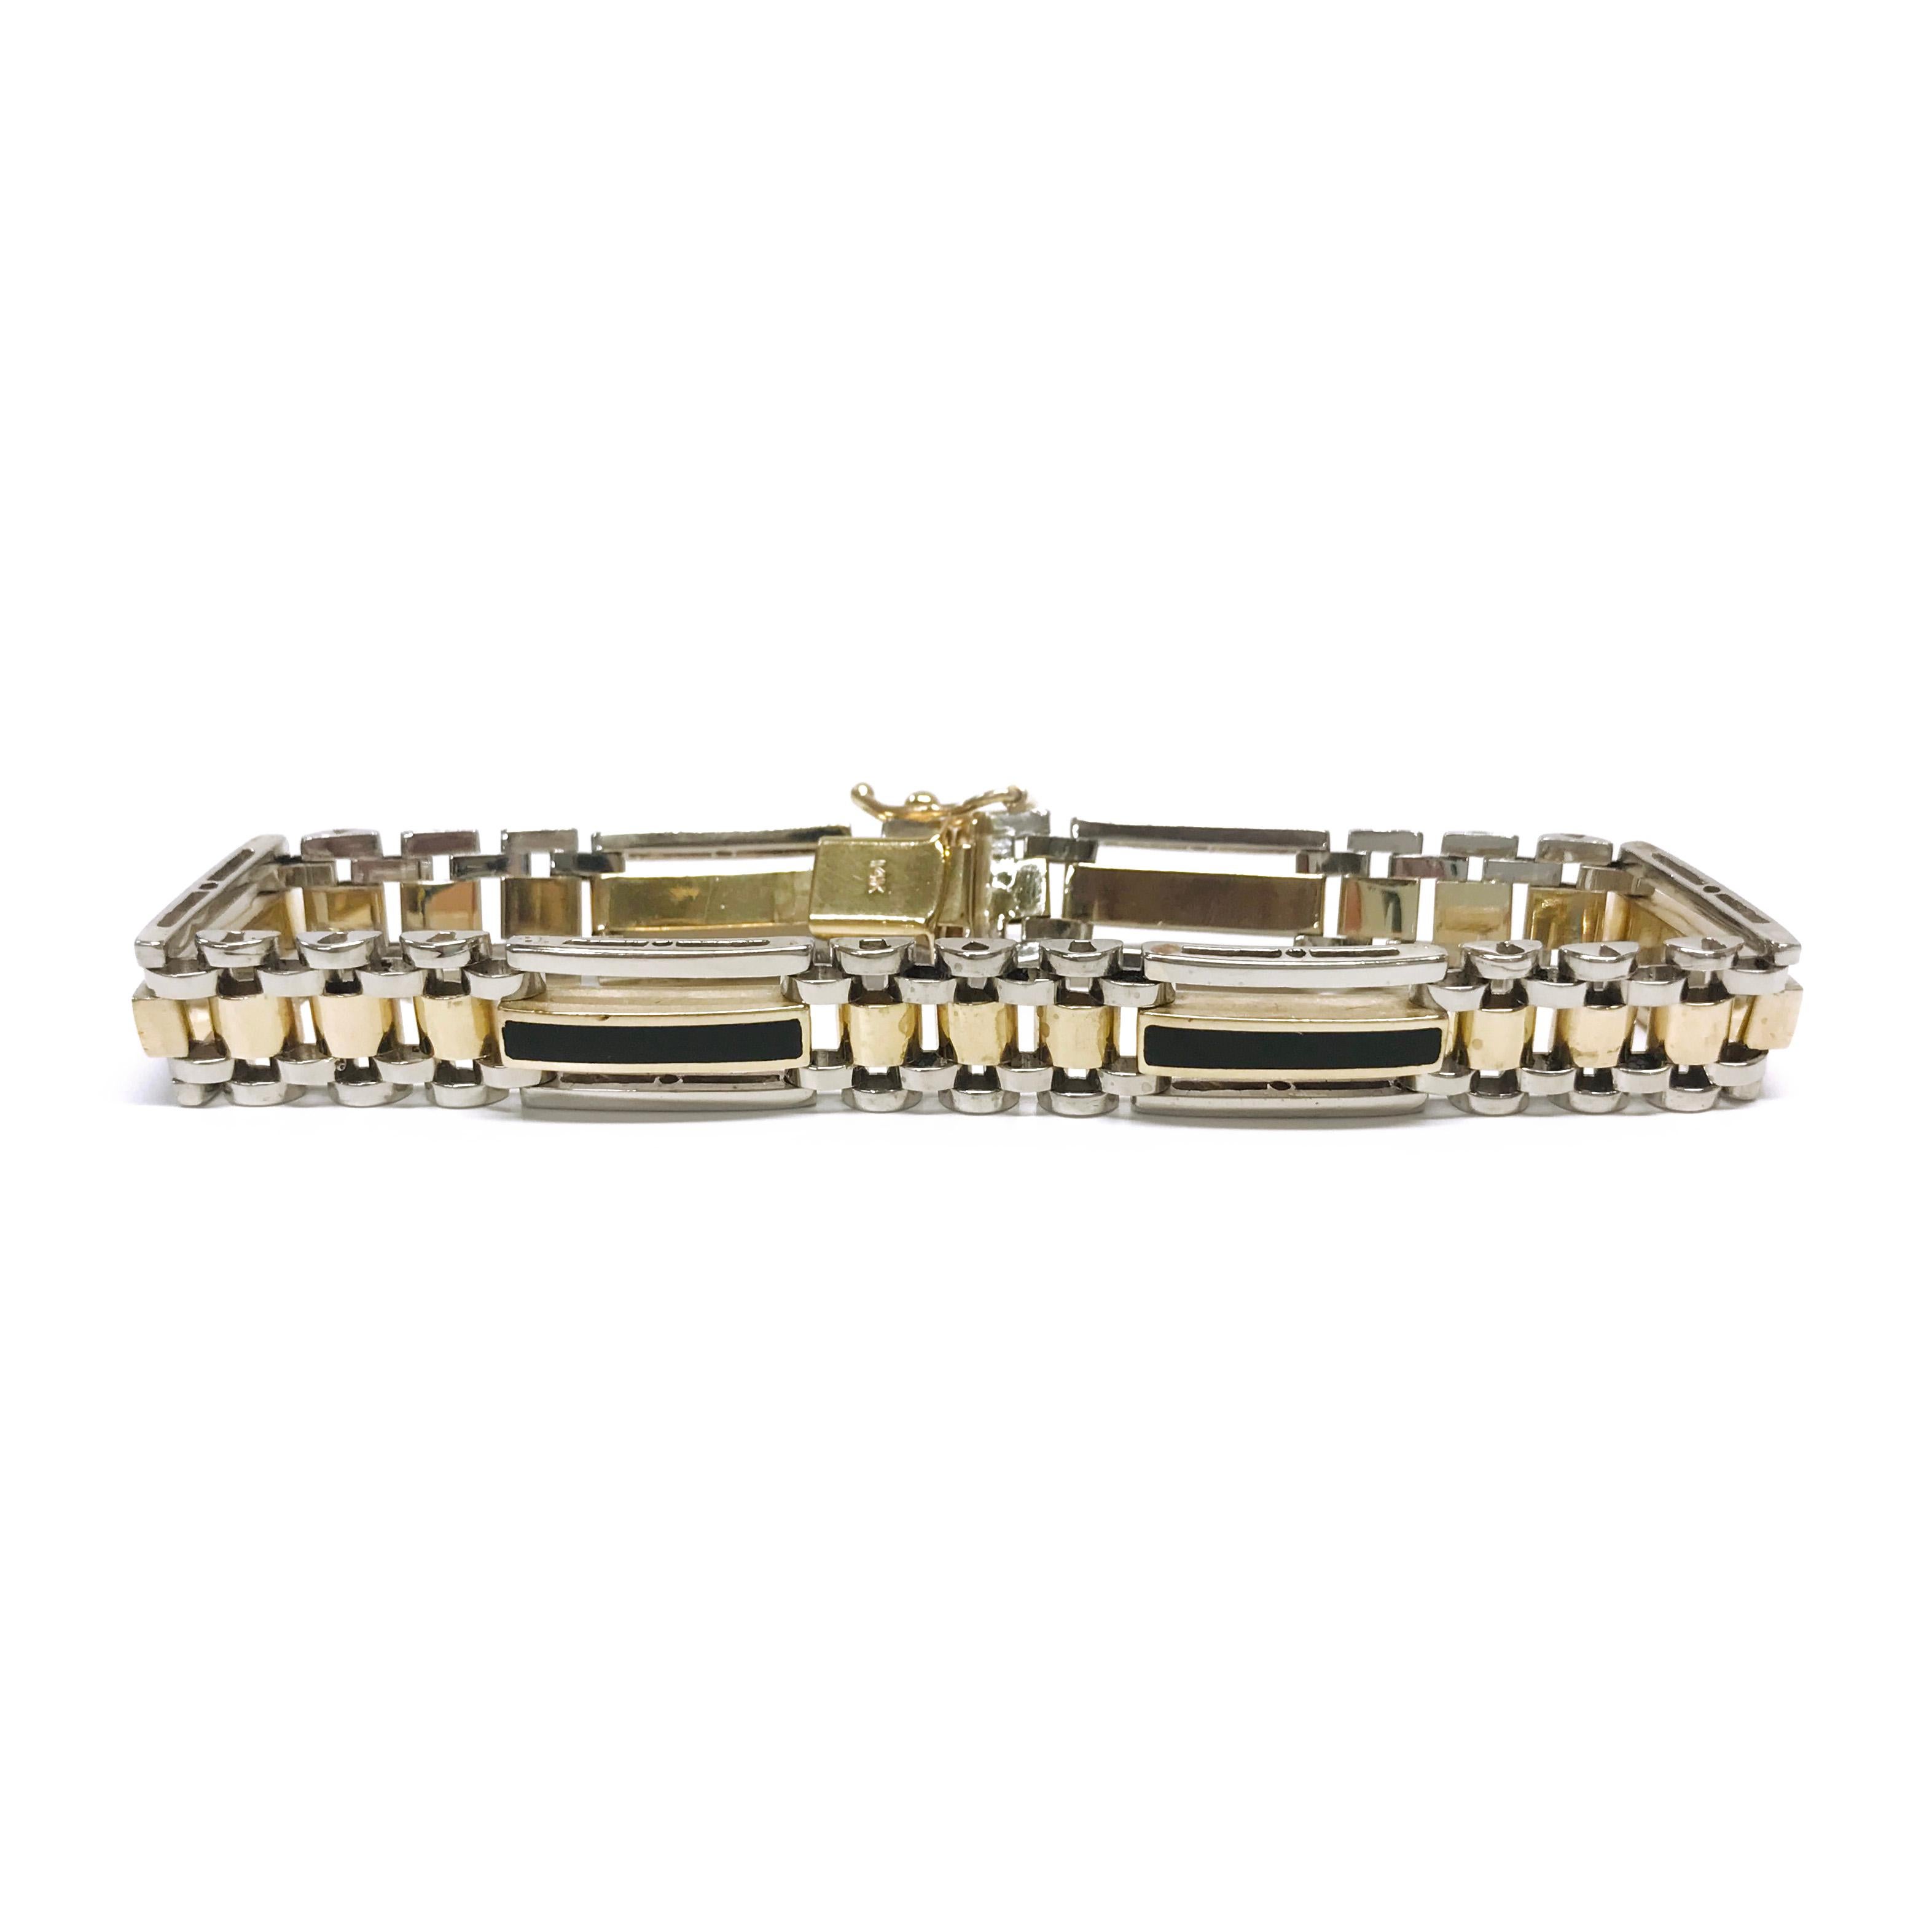 Gentleman's 14 Karat Gold Onyx Bracelet. The bracelet features five horizontal bar links with black Onyx inlay and five sets of three links in between.  The entire bracelet has a shiny smooth finish for a sleek sophisticated look. The bracelet is